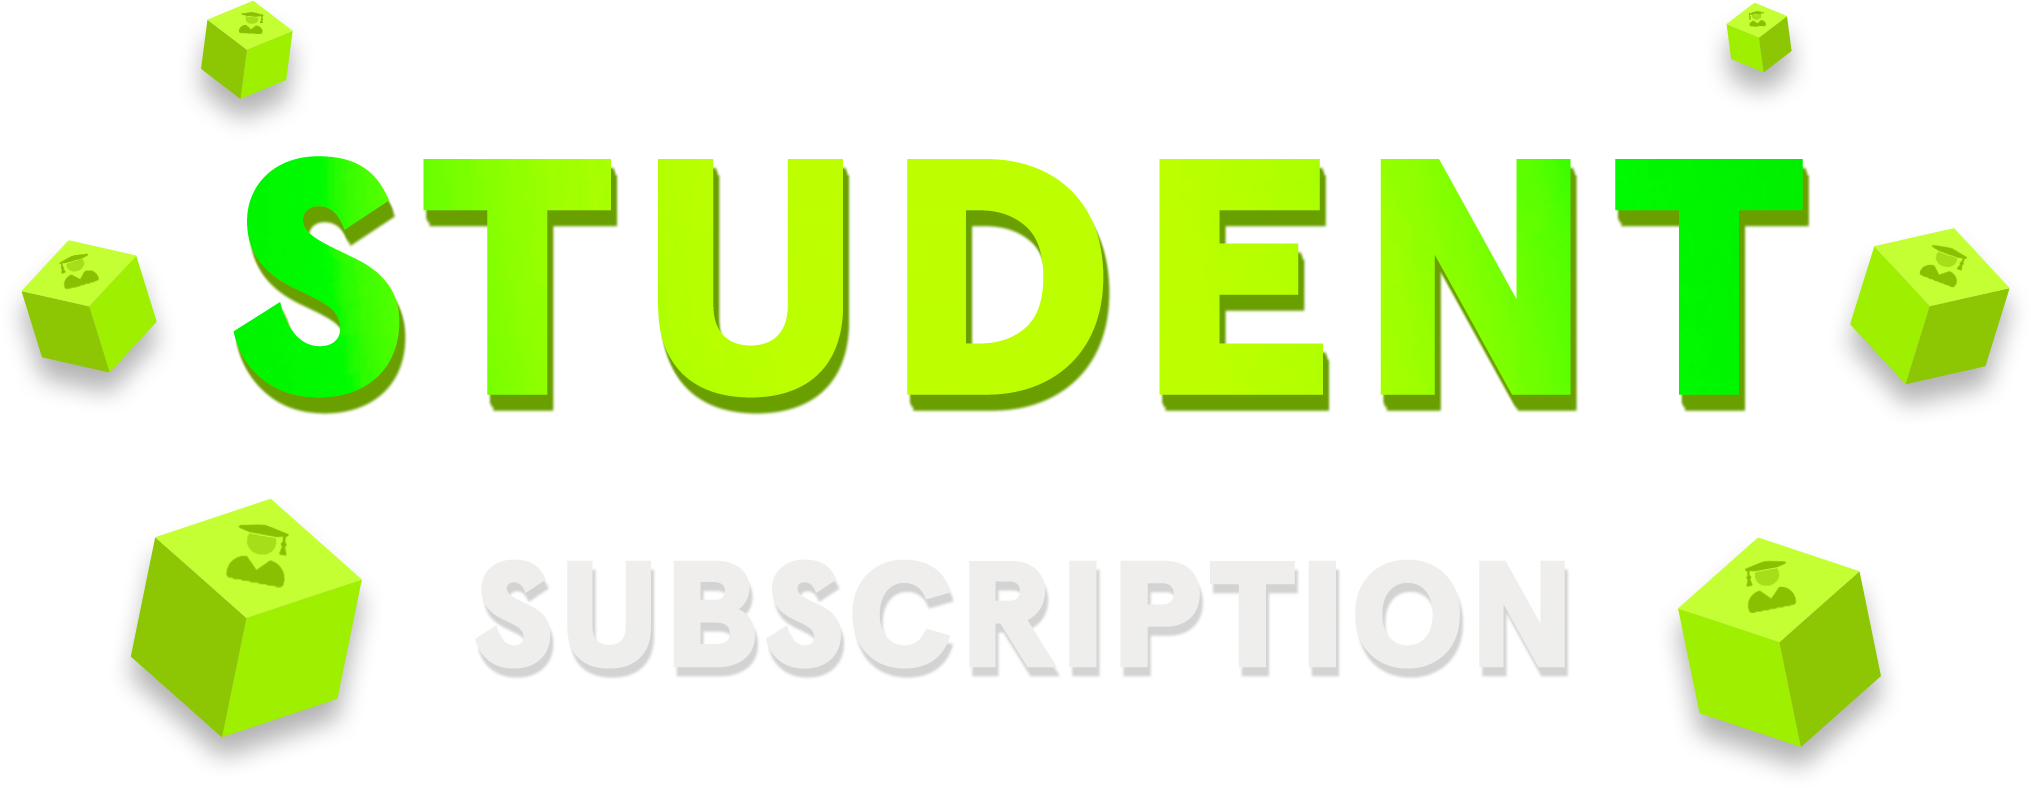 The "Student Sub" for HTB Academy has landed!